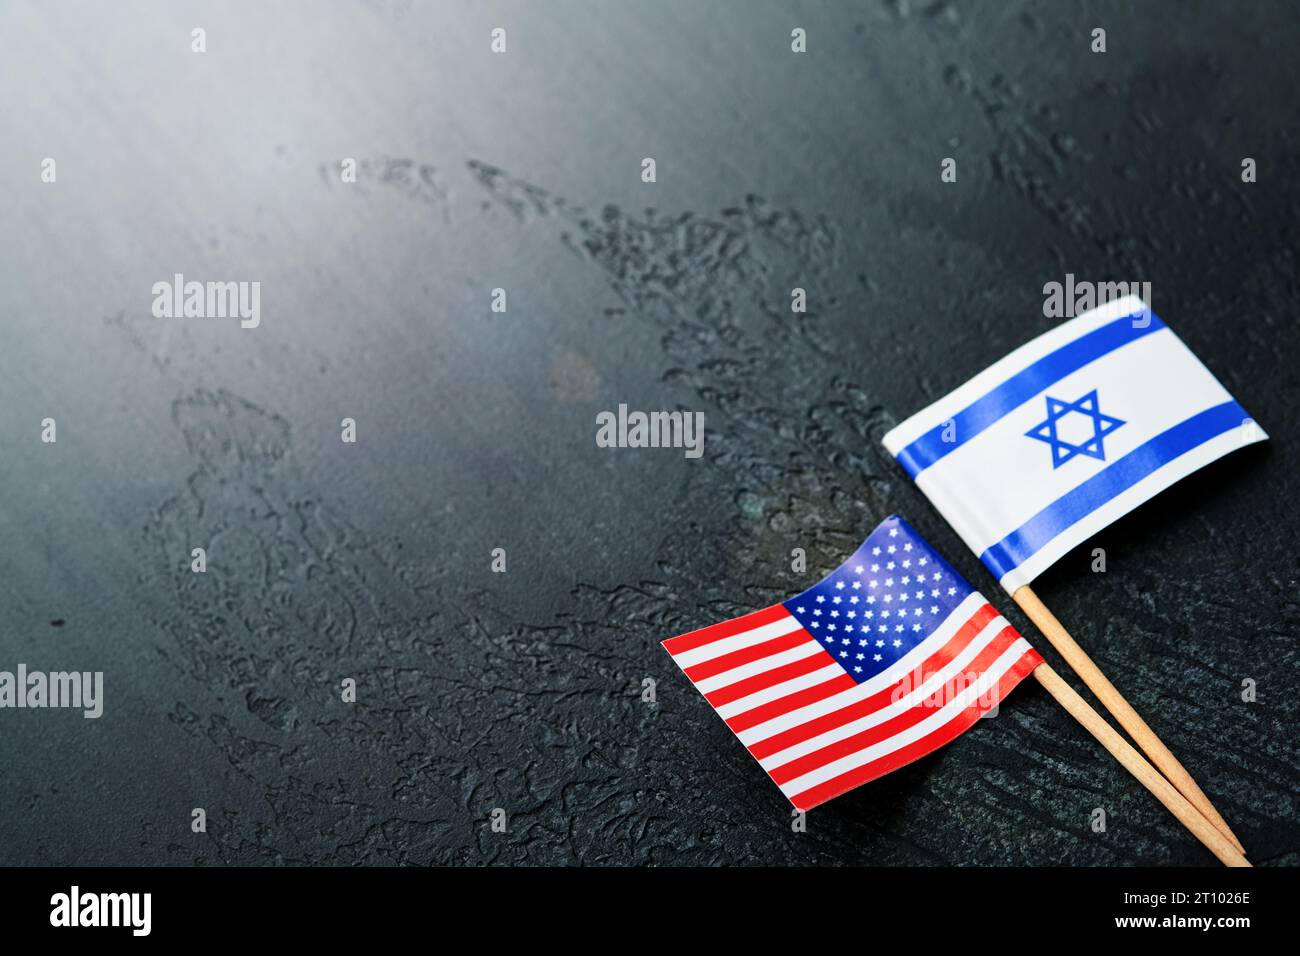 USA Israel flags. Two small American and Israeli flags lie on black old texture background opposite each other conveys partnership between two states Stock Photo